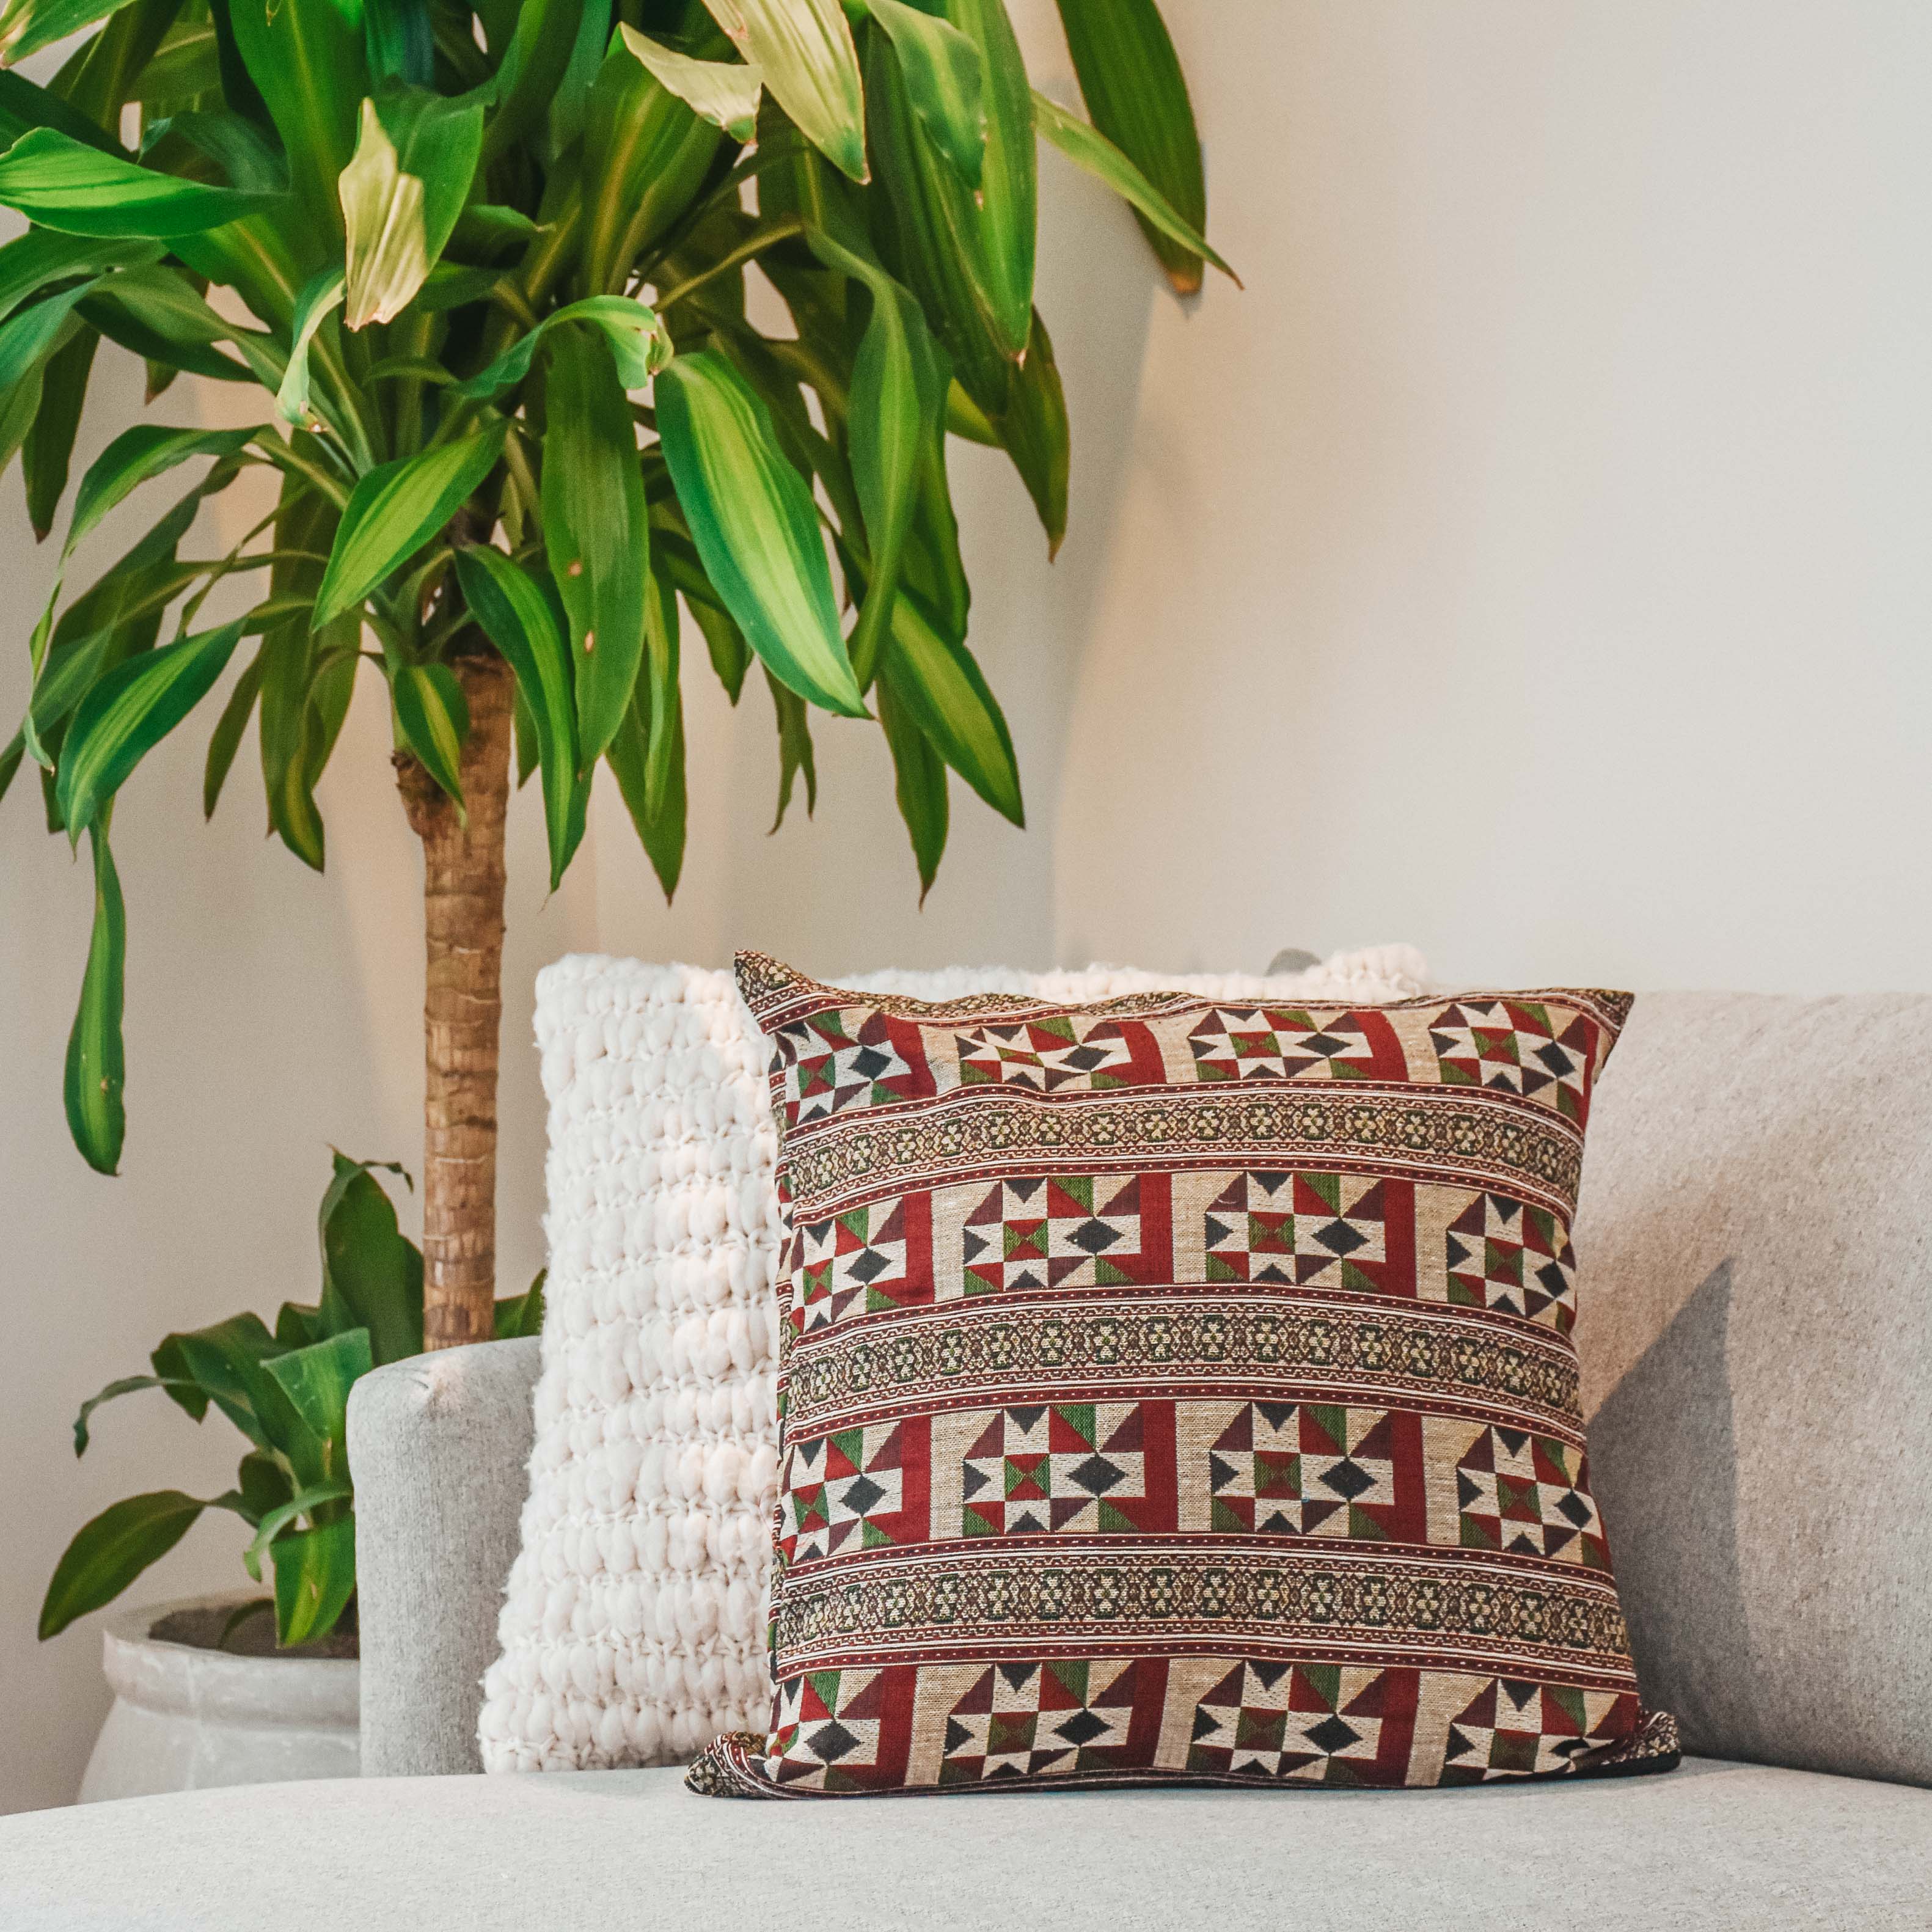 TULUM PILLOW COVER Elepanta Pillows - Buy Today Elephant Pants Jewelry And Bohemian Clothes Handmade In Thailand Help To Save The Elephants FairTrade And Vegan